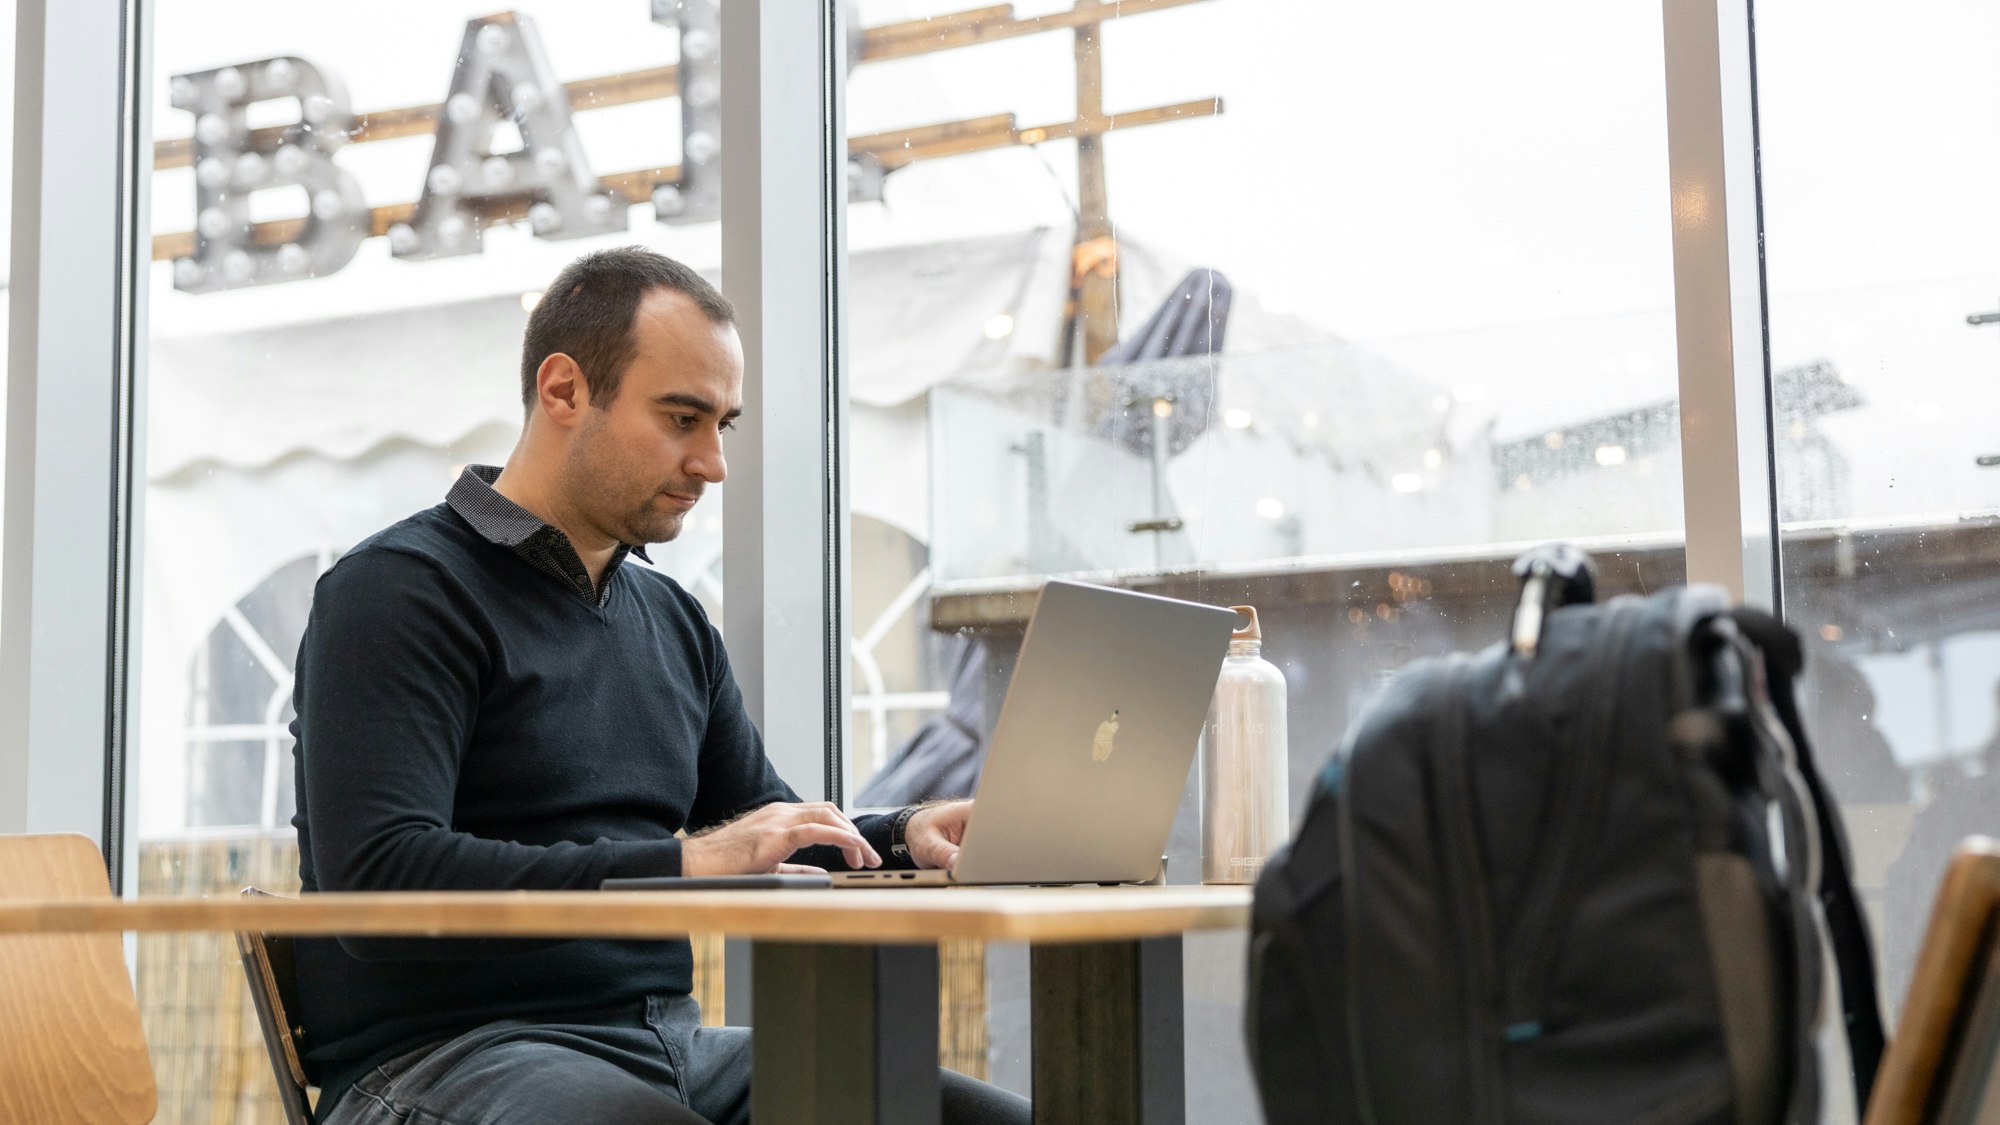 A man in a black shirt working on a laptop